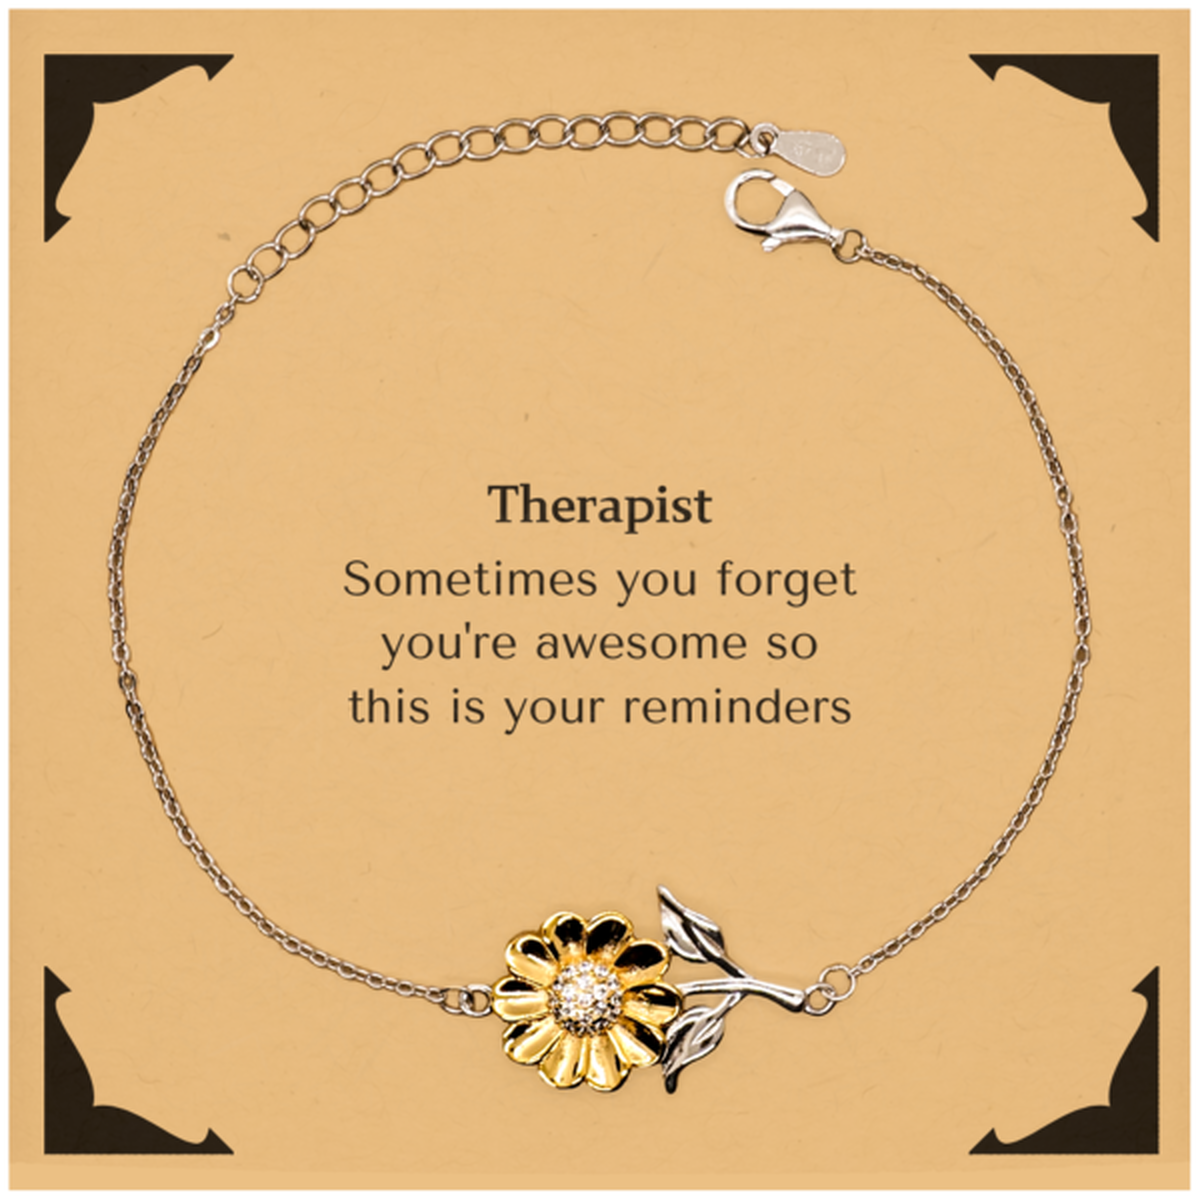 Sentimental Therapist Sunflower Bracelet, Therapist Sometimes you forget you're awesome so this is your reminders, Graduation Christmas Birthday Gifts for Therapist, Men, Women, Coworkers